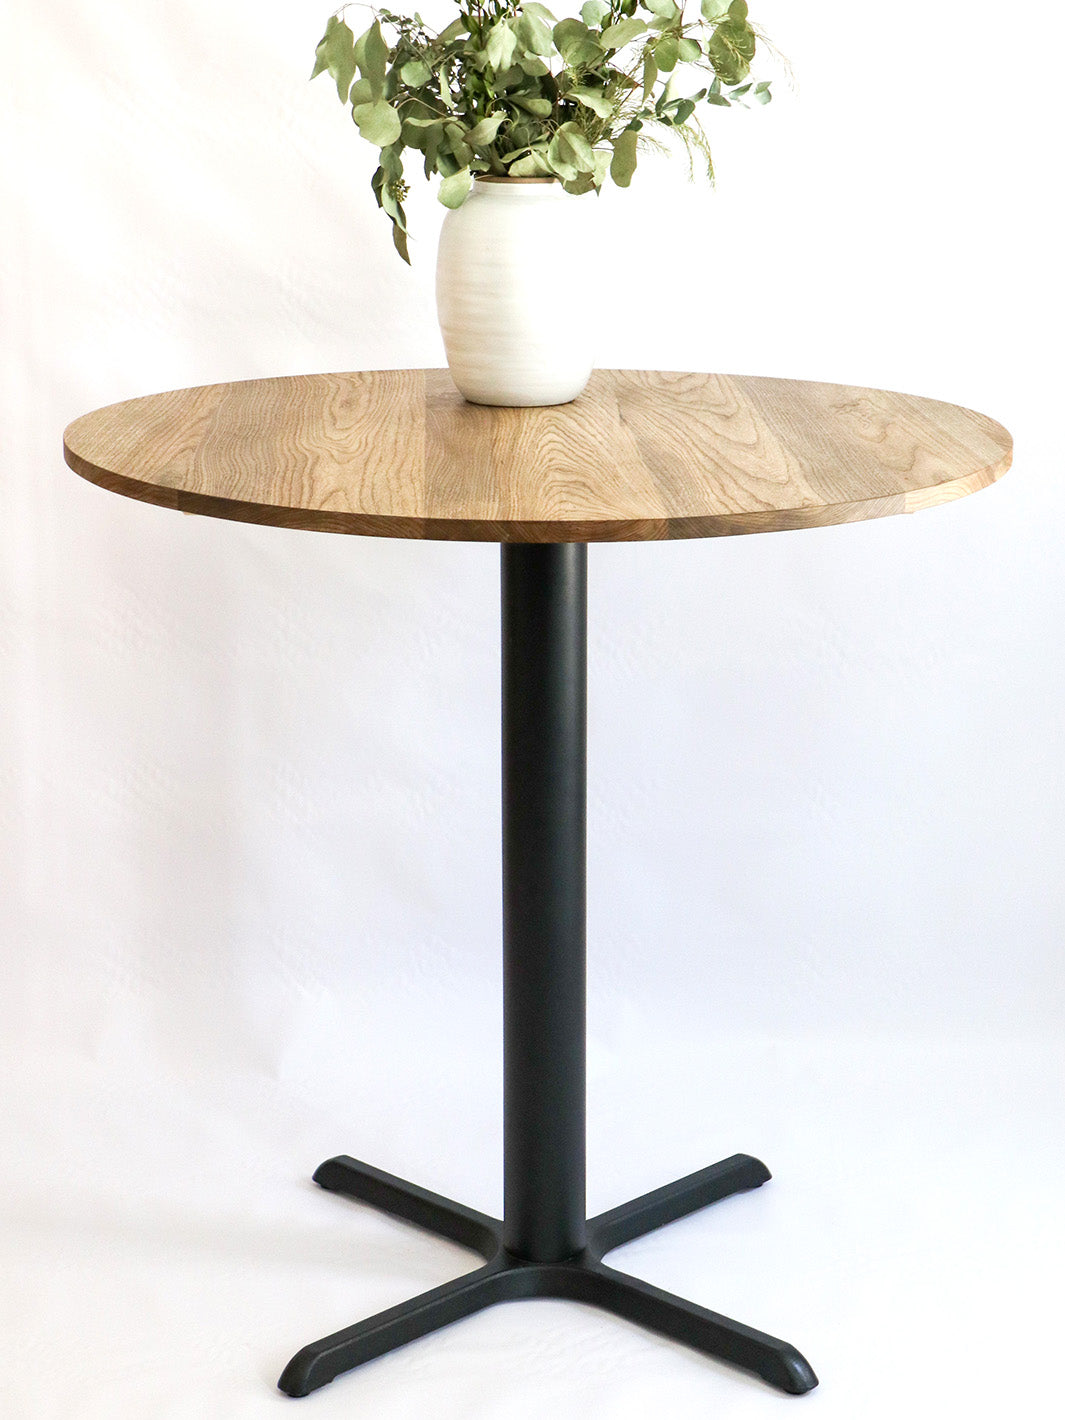 Modern Round Hackberry Pub Table with Black Steel Legs | Bar or Standard Height Earthly Comfort dining table 1529-6